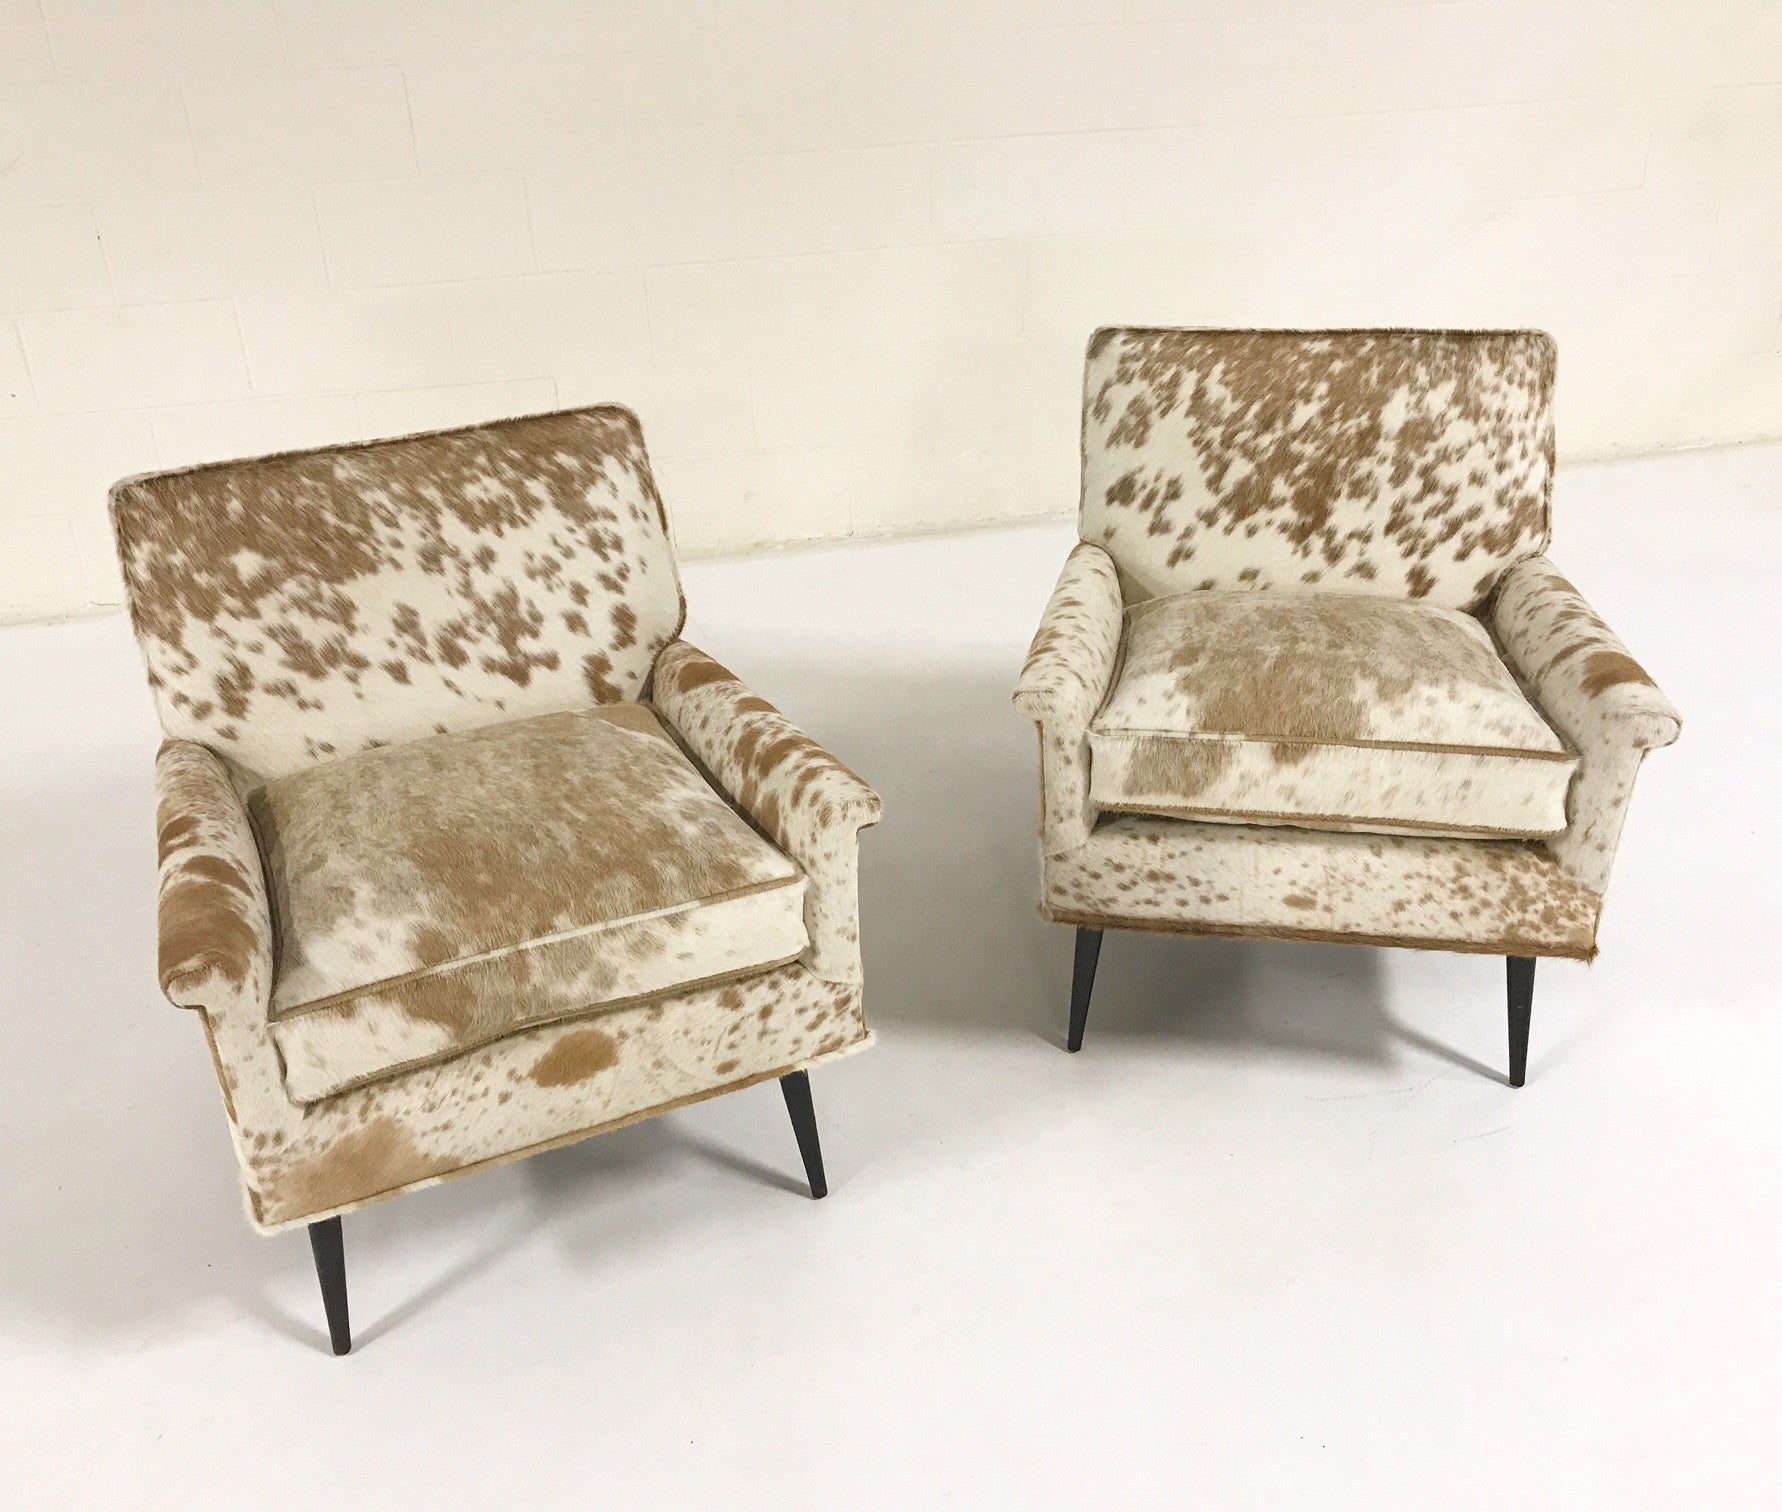 Lounge Chairs in Brazilian Cowhide, pair - FORSYTH